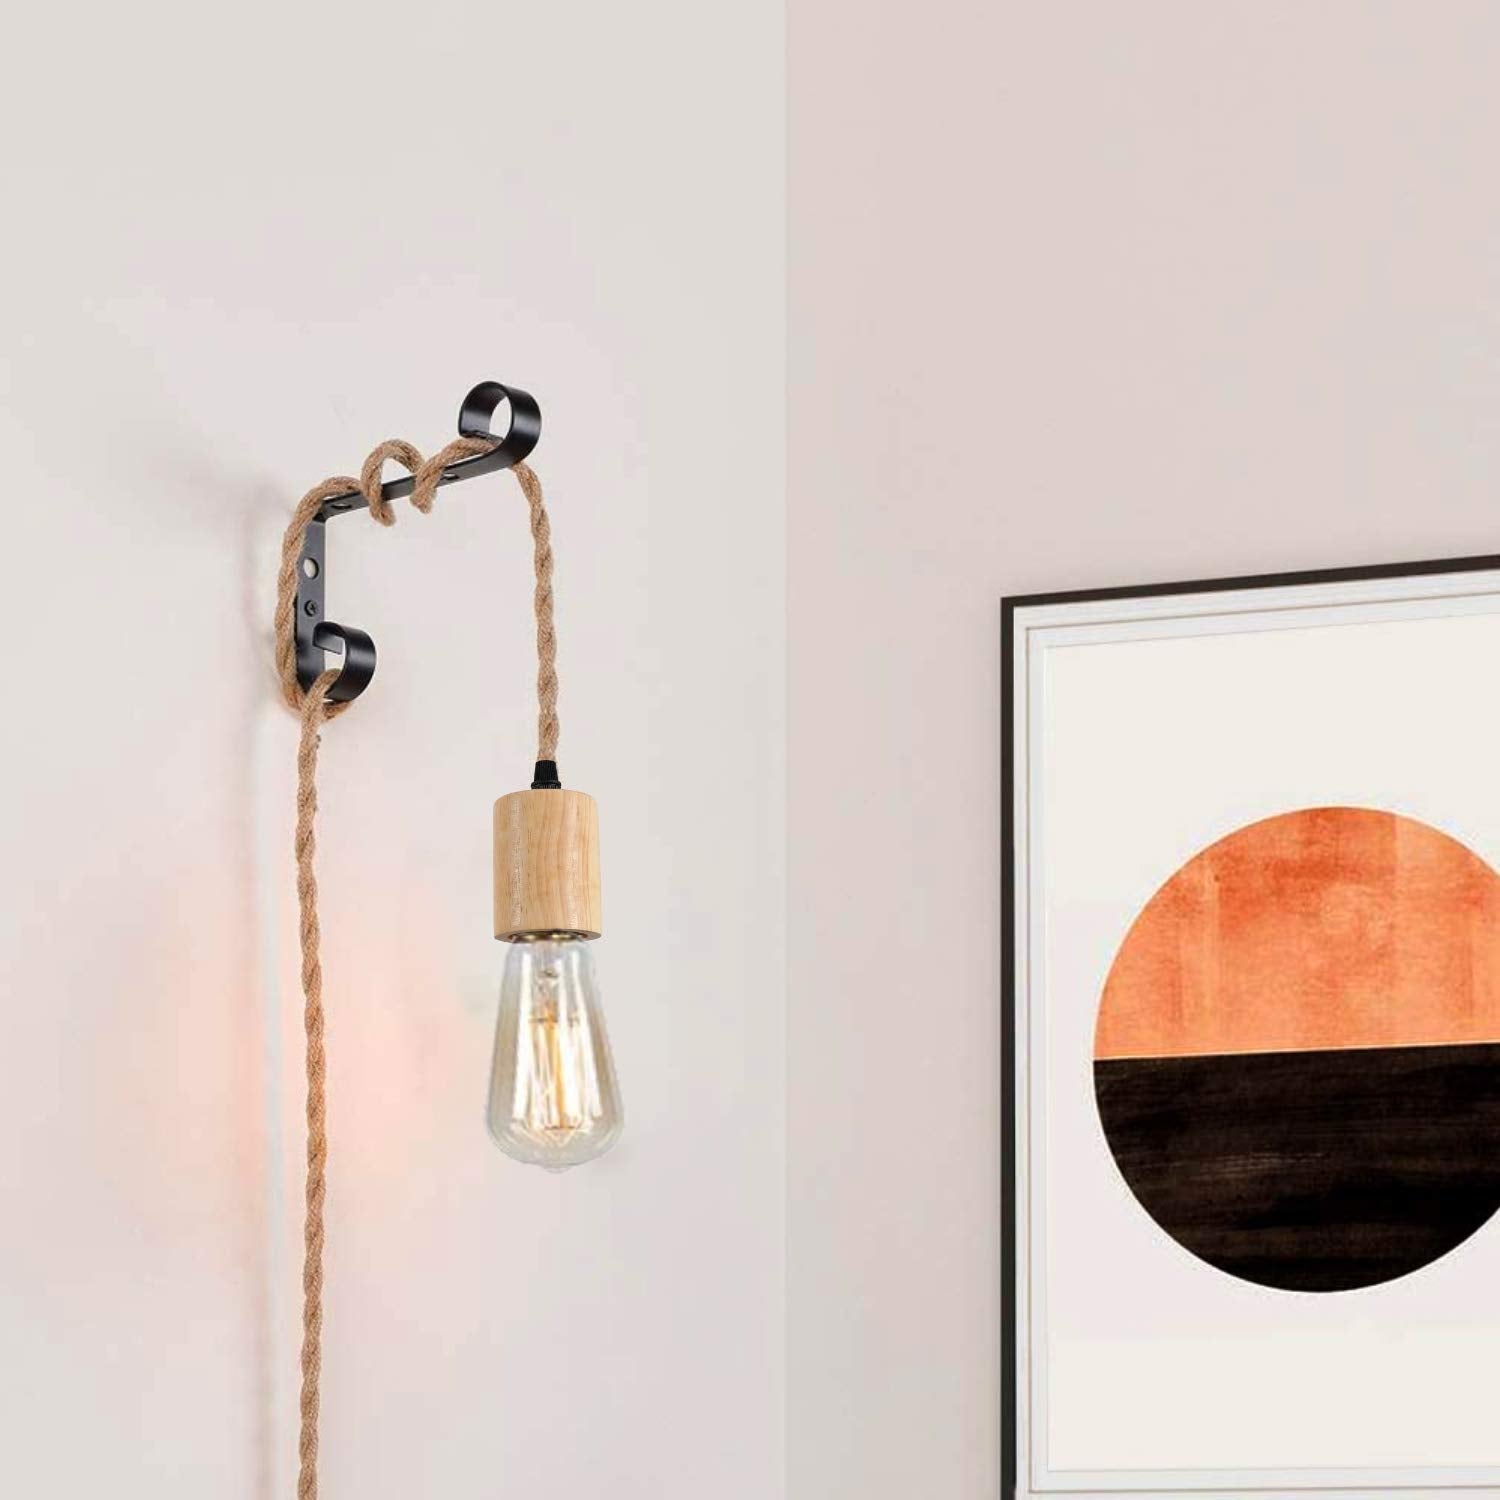 Industrial 16.4FT Wood Pendant Light Cord Kit With Switch